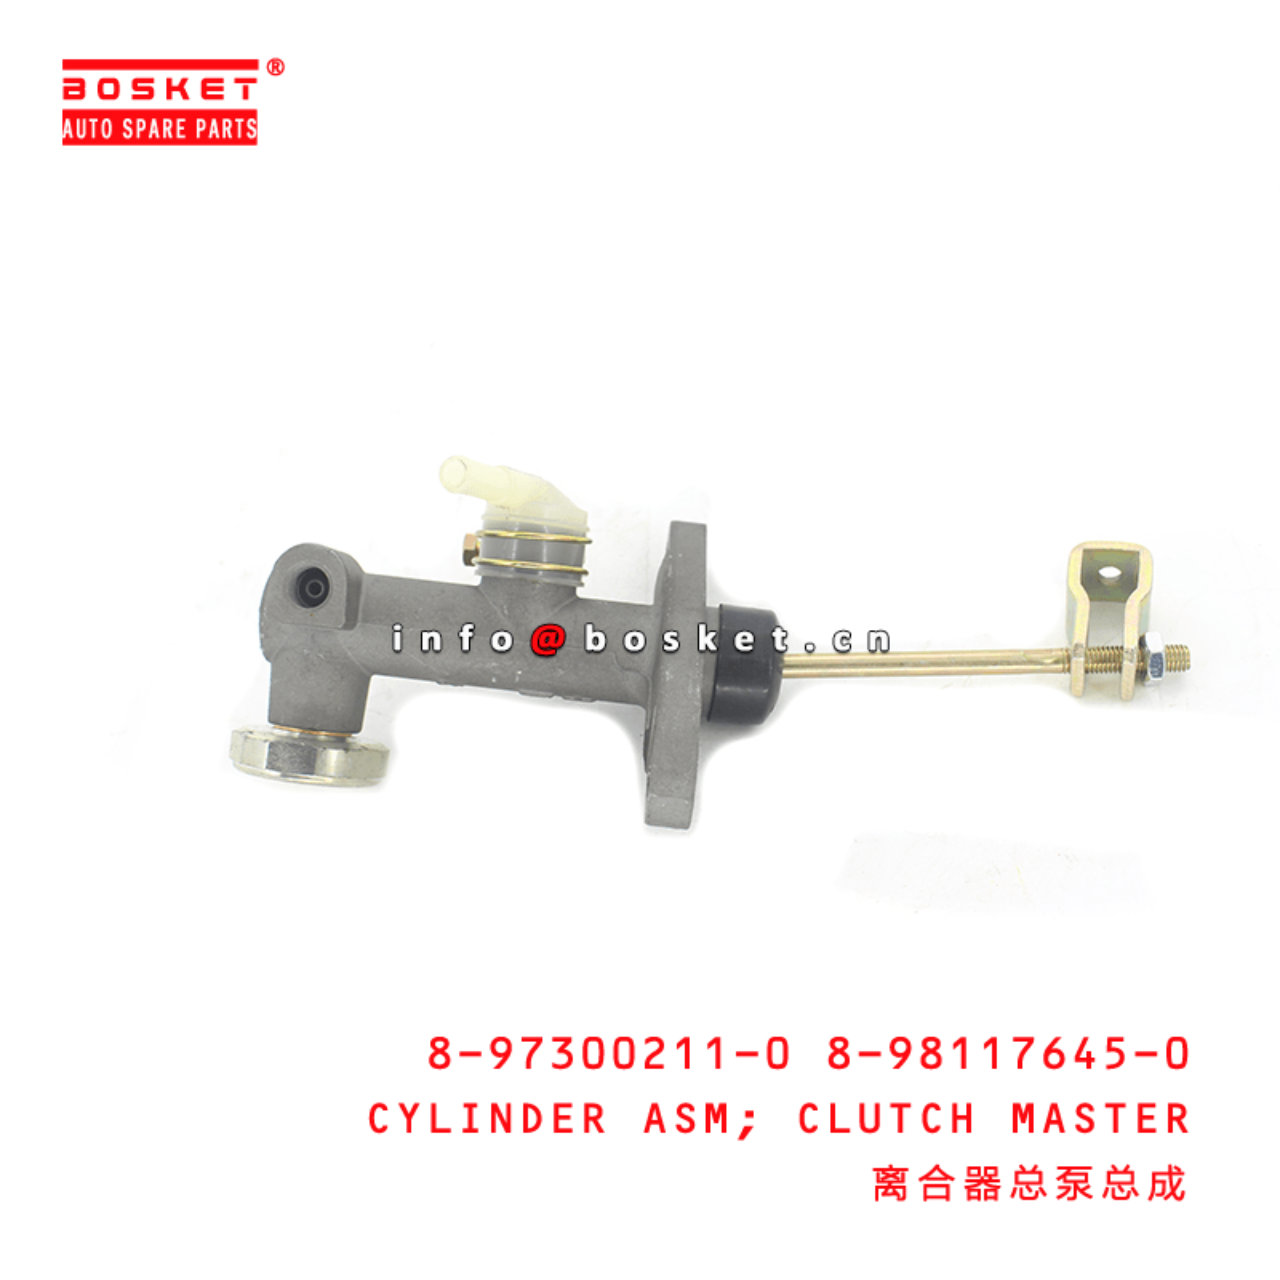 8-97300211-0 8-98117645-0 Clutch Master Cylinder Assembly 8973002110 8981176450 Suitable for ISUZU N